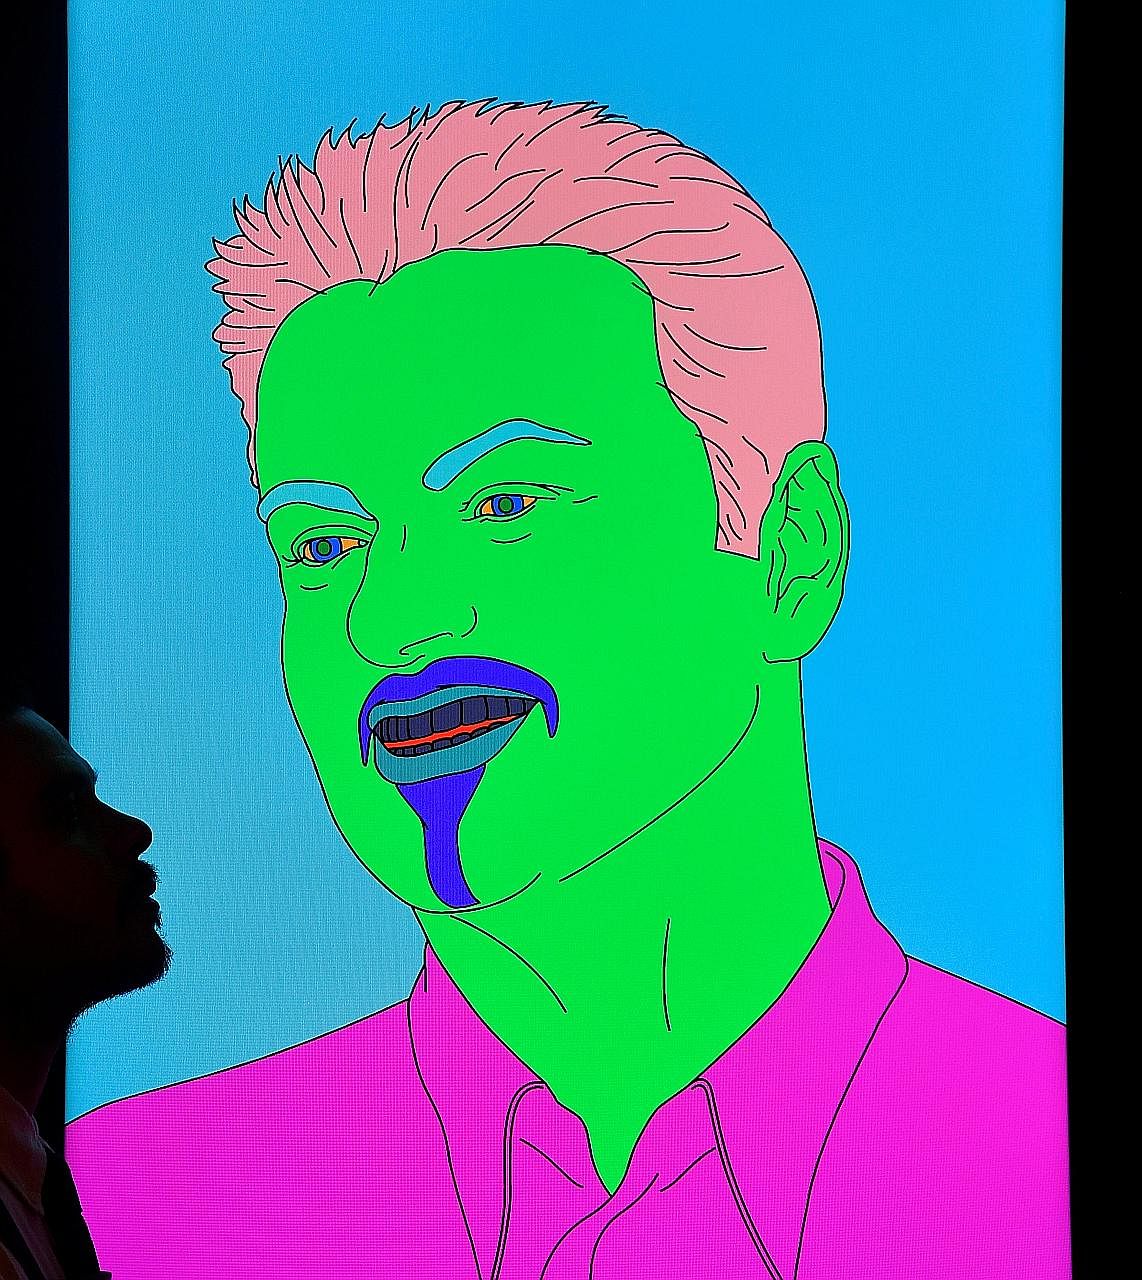 A portrait titled (George) by Michael Craig-Martin from George Michael's collection.